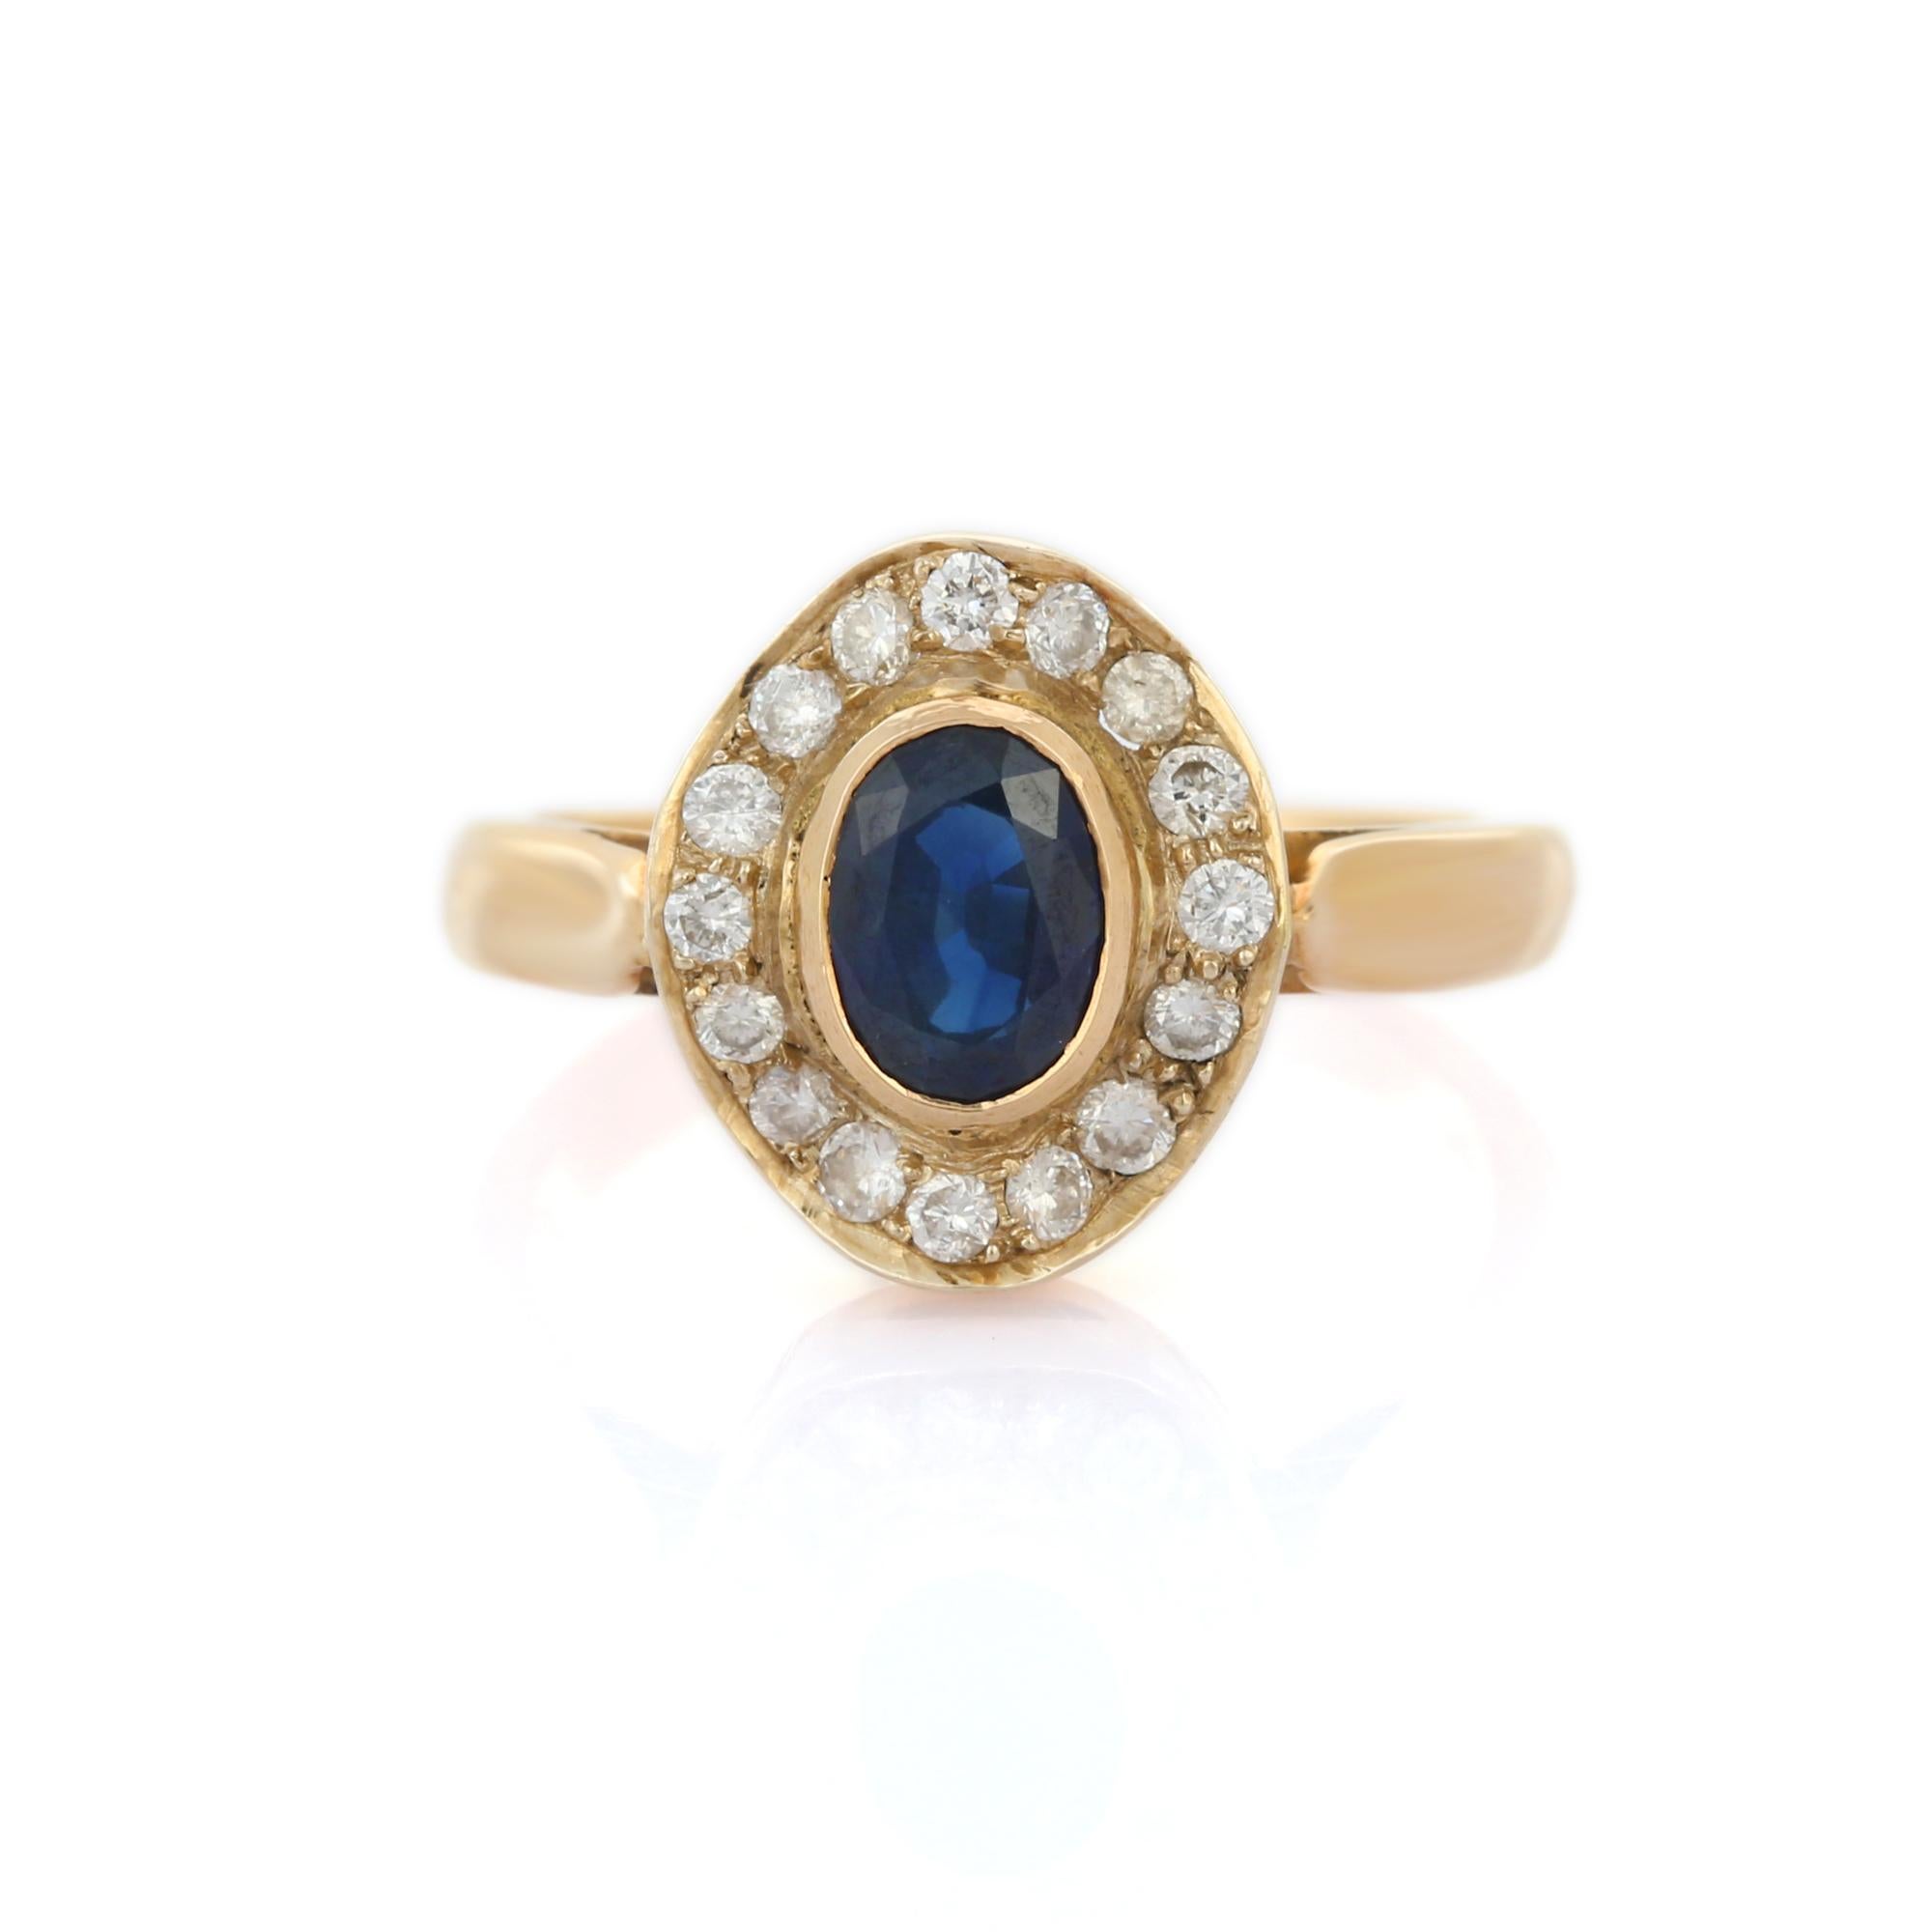 For Sale:  Alluring 18K Solid Yellow Gold Blue Sapphire Diamond Ring, Yellow Gold Ring 2